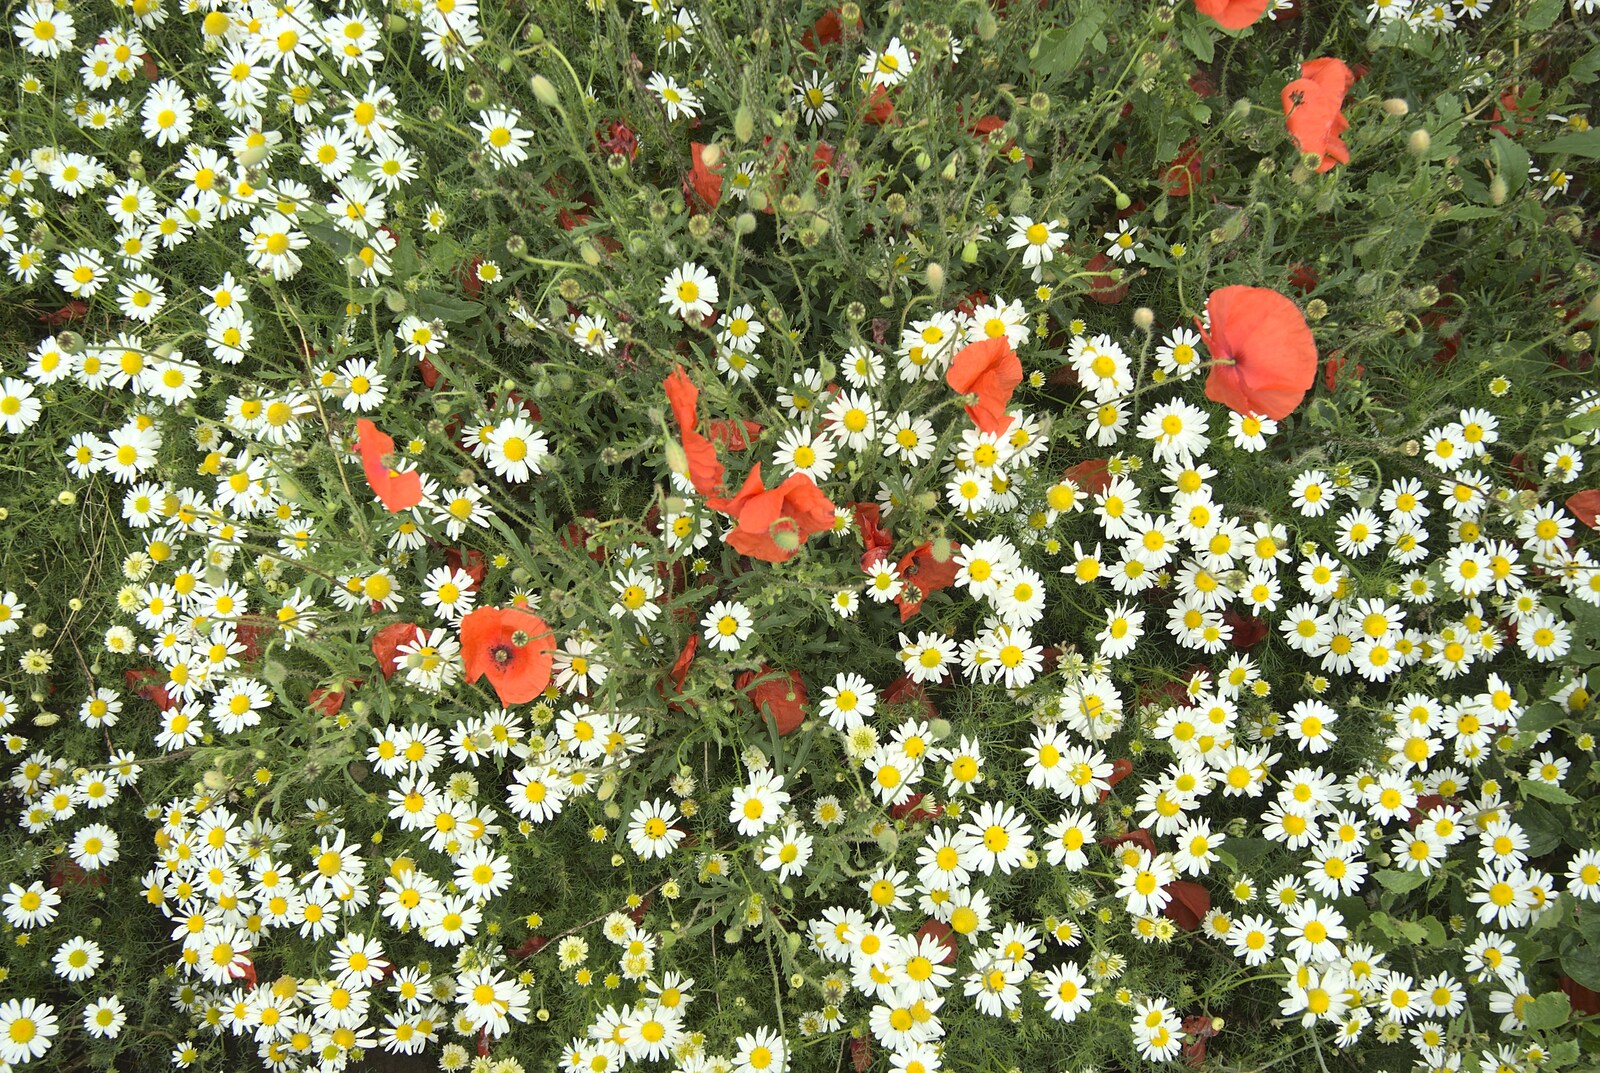 Poppies and chamomile from Summer Walks, and The BBs Play a Taptu Gig, Suffolk and Cambridge - 12th July 2009